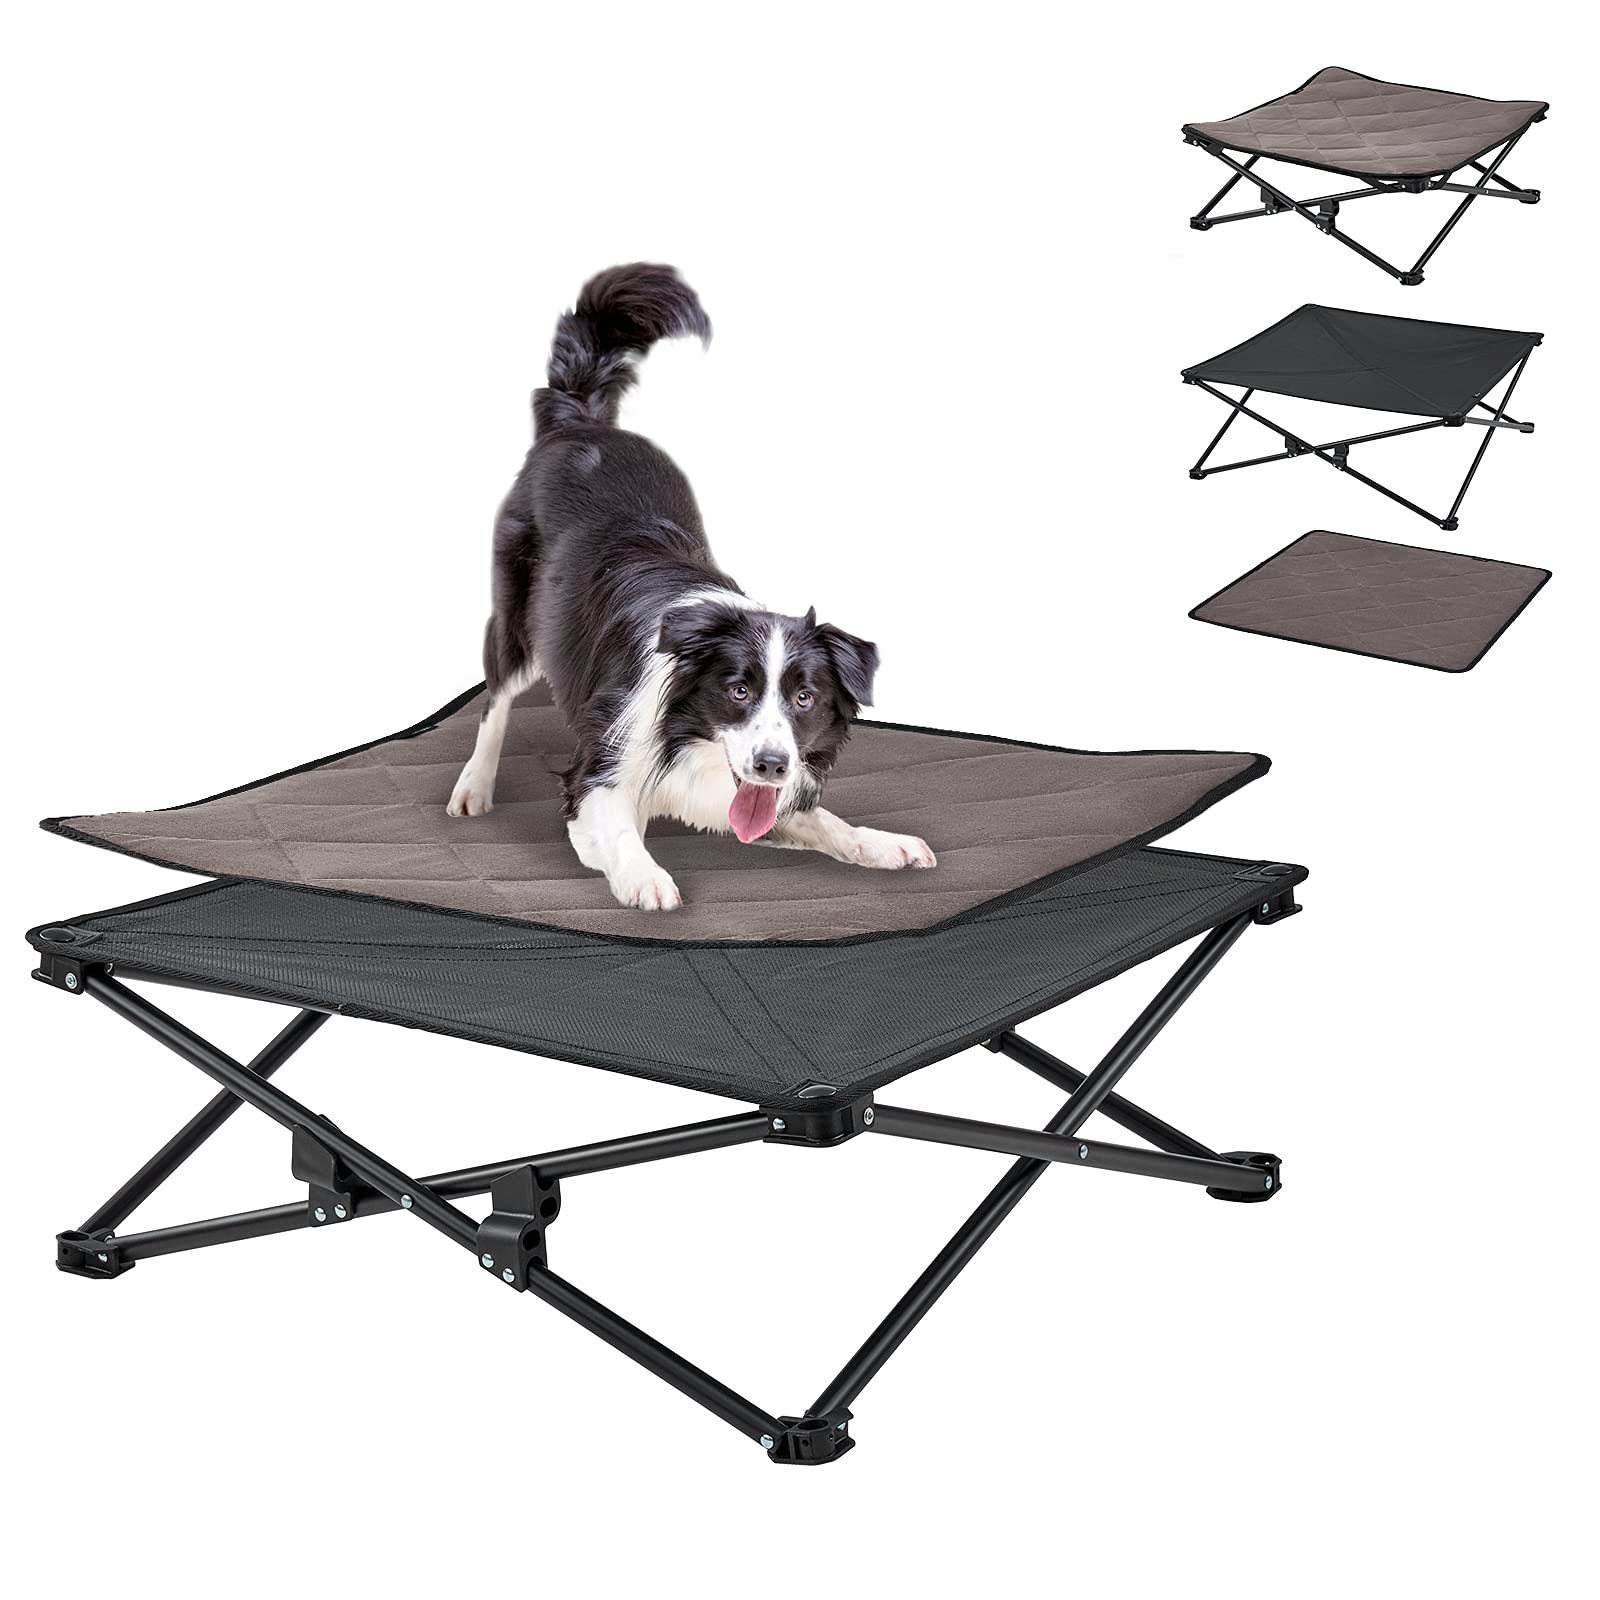 Up To 55% Off on Dog Cooling Mats for Cat Dog